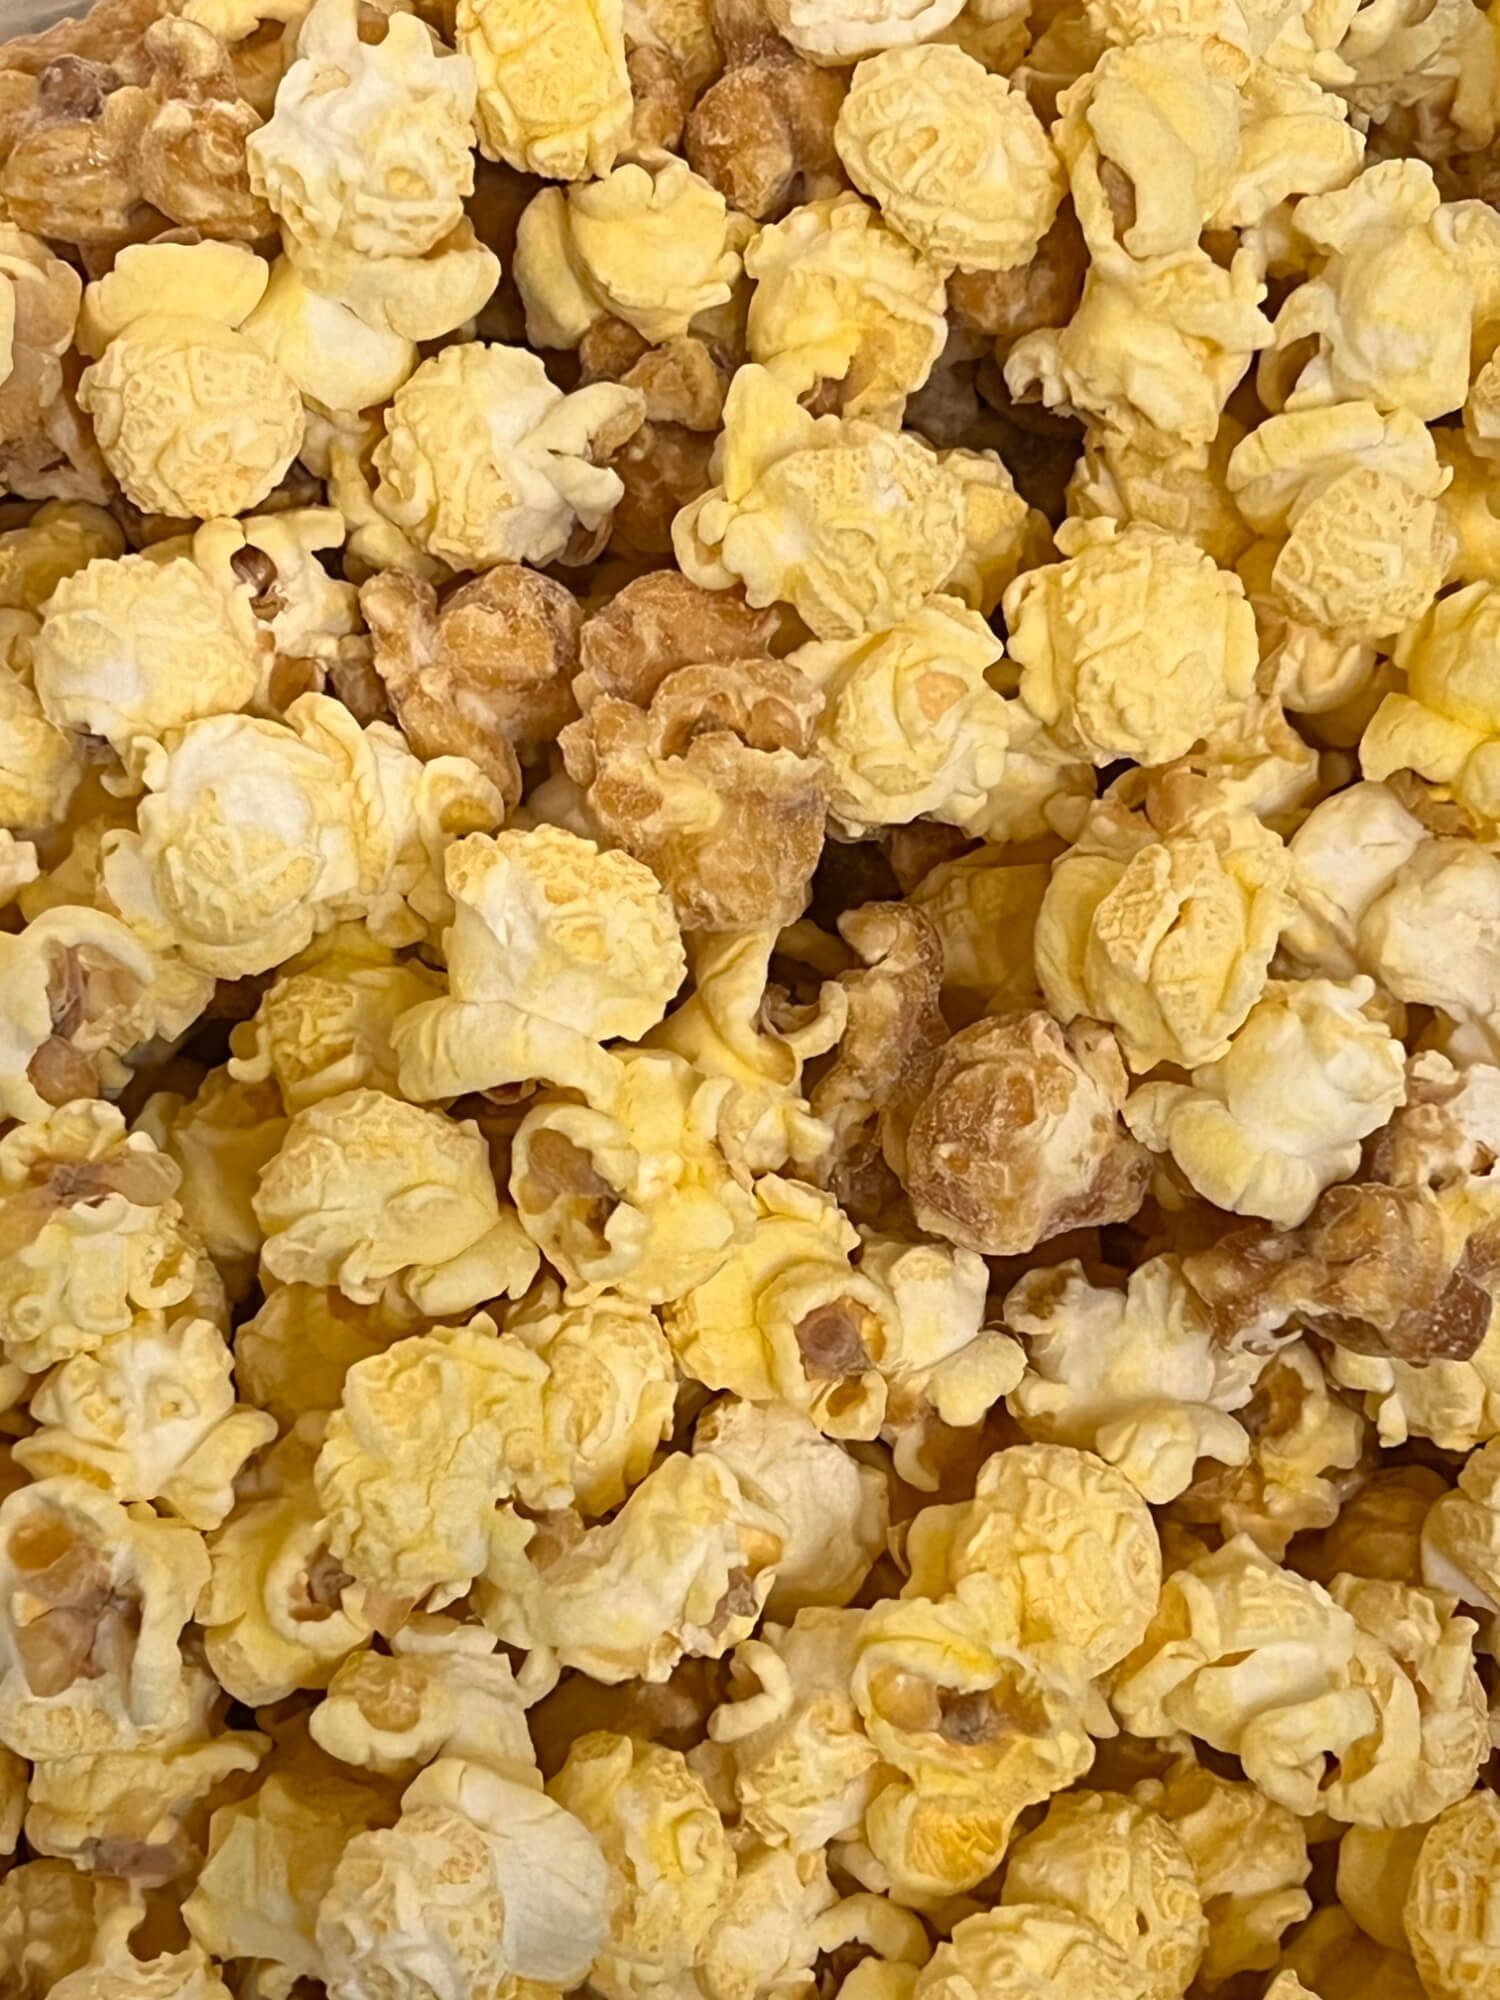 A close up of a pile of popcorn on a table.